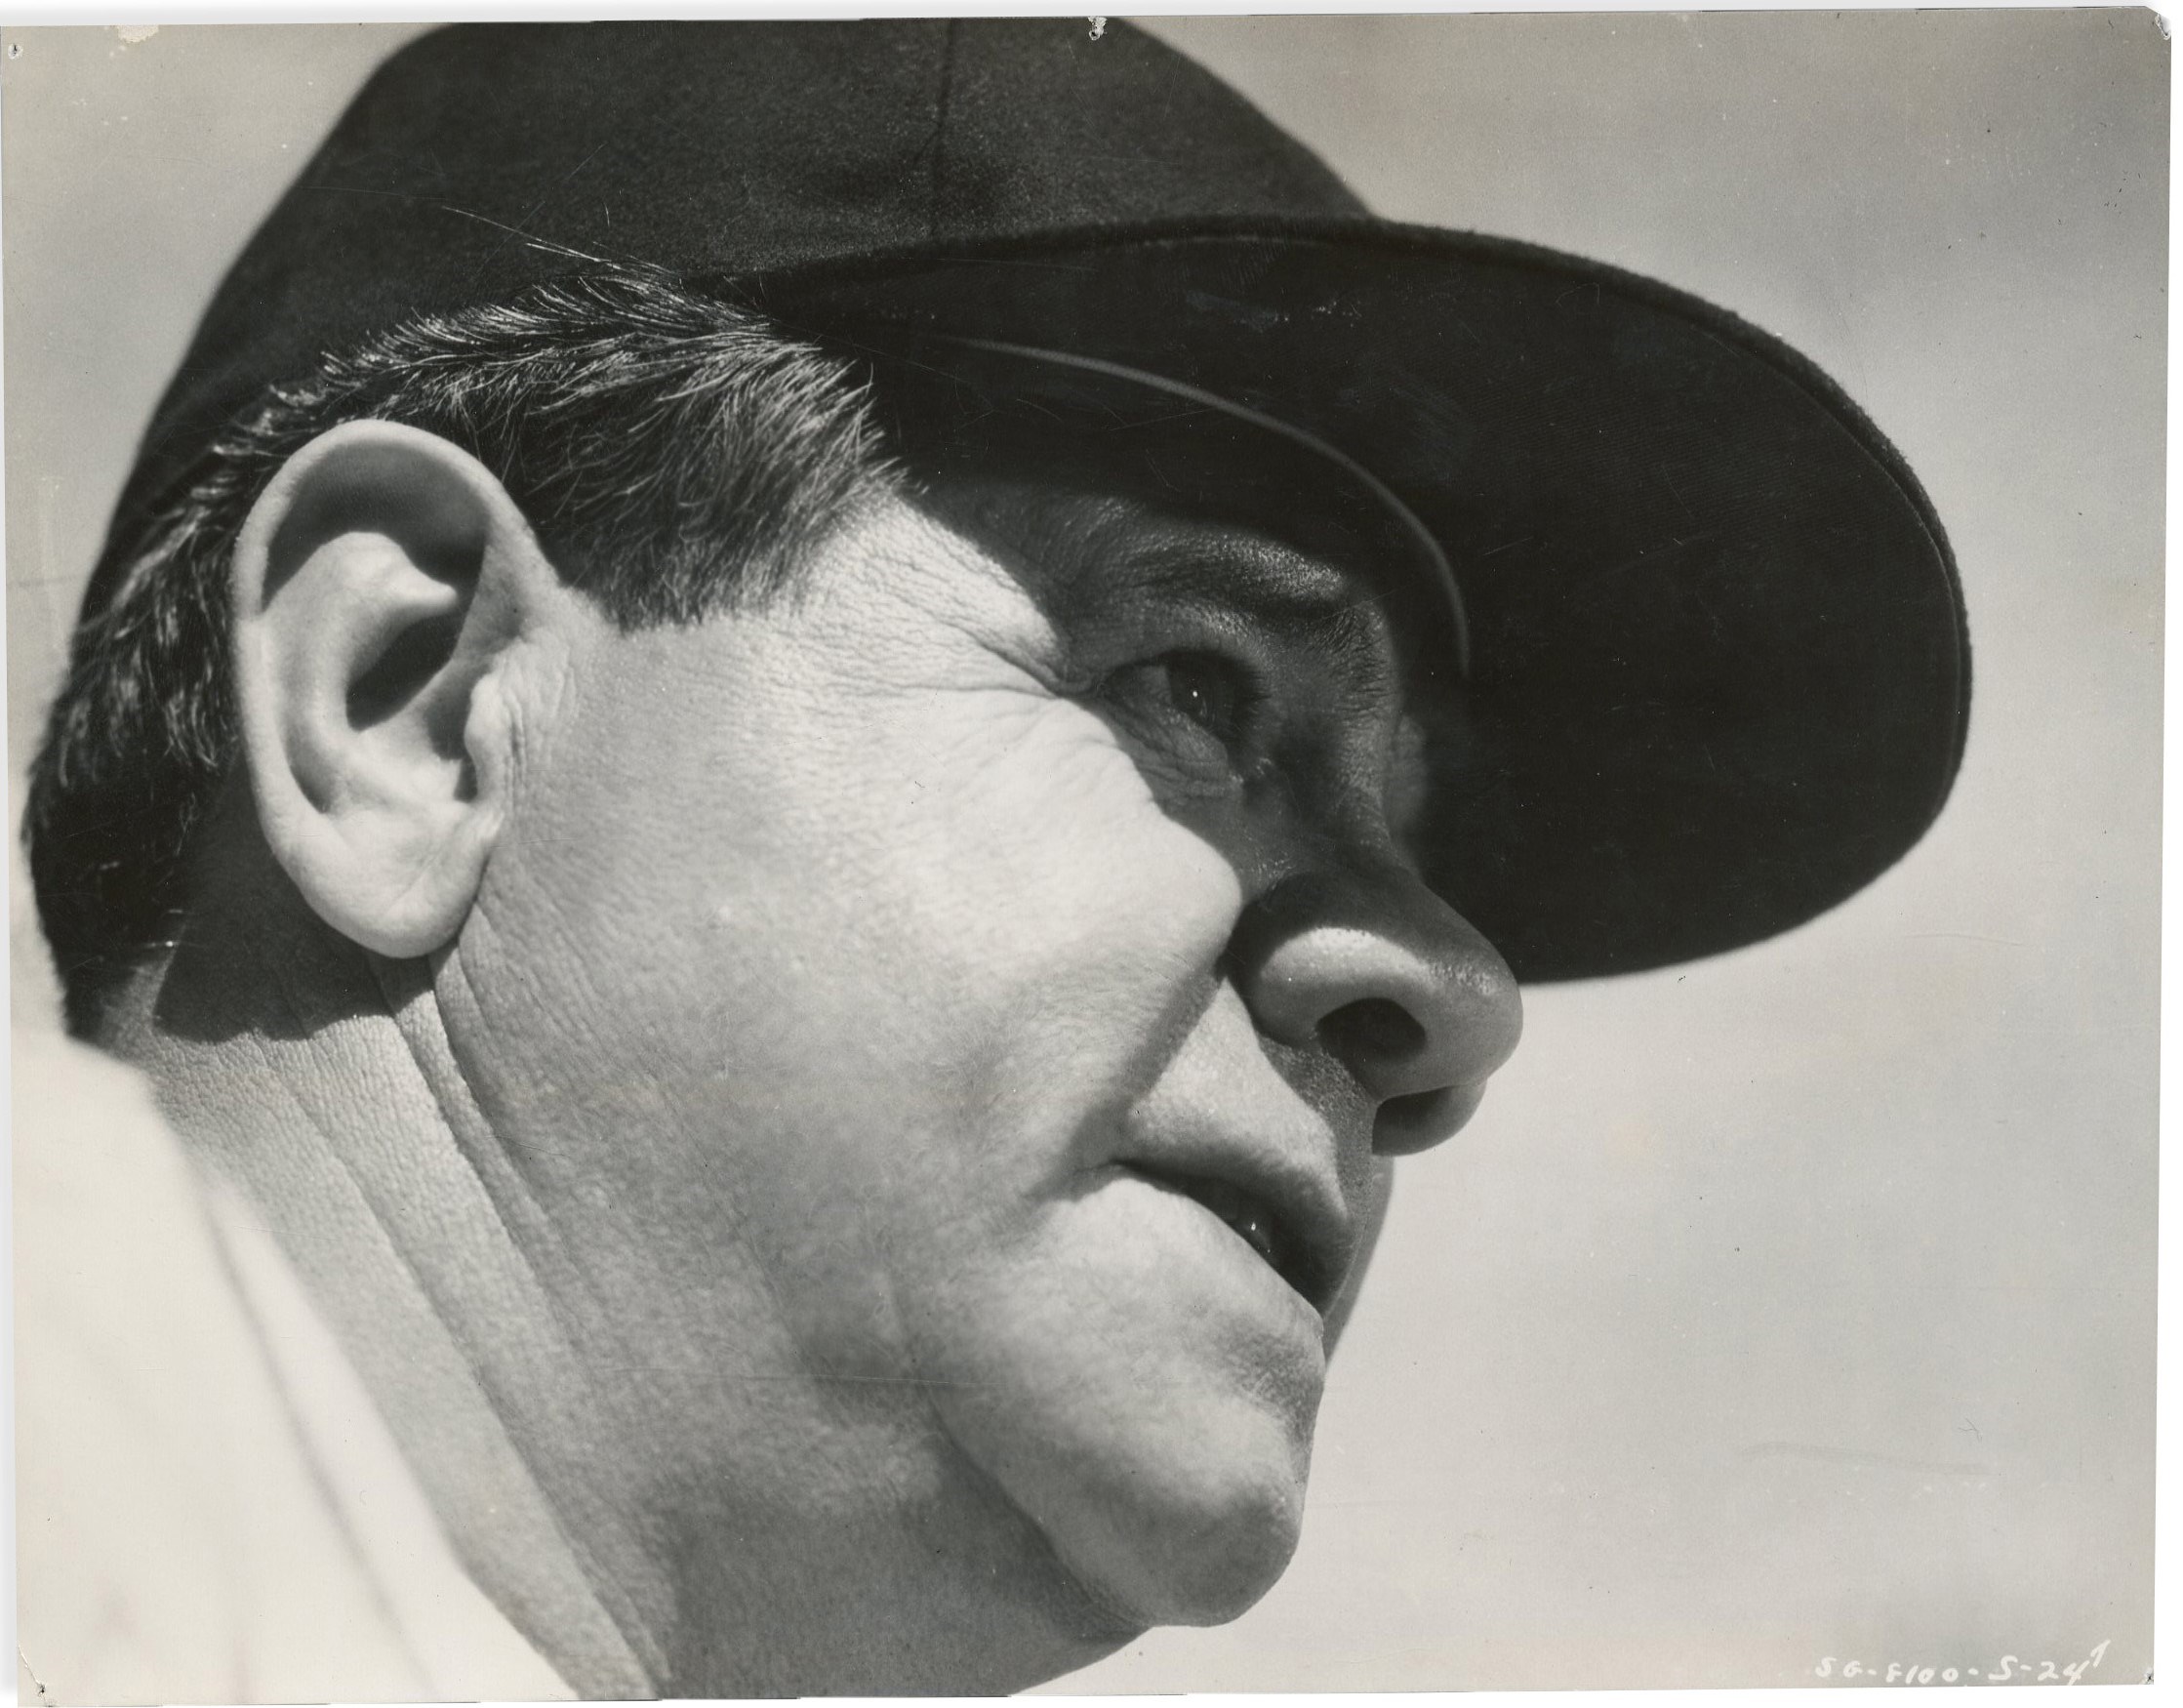 NY Yankees, Giants & Mets - Exceptional Babe Ruth Type I Photograph.